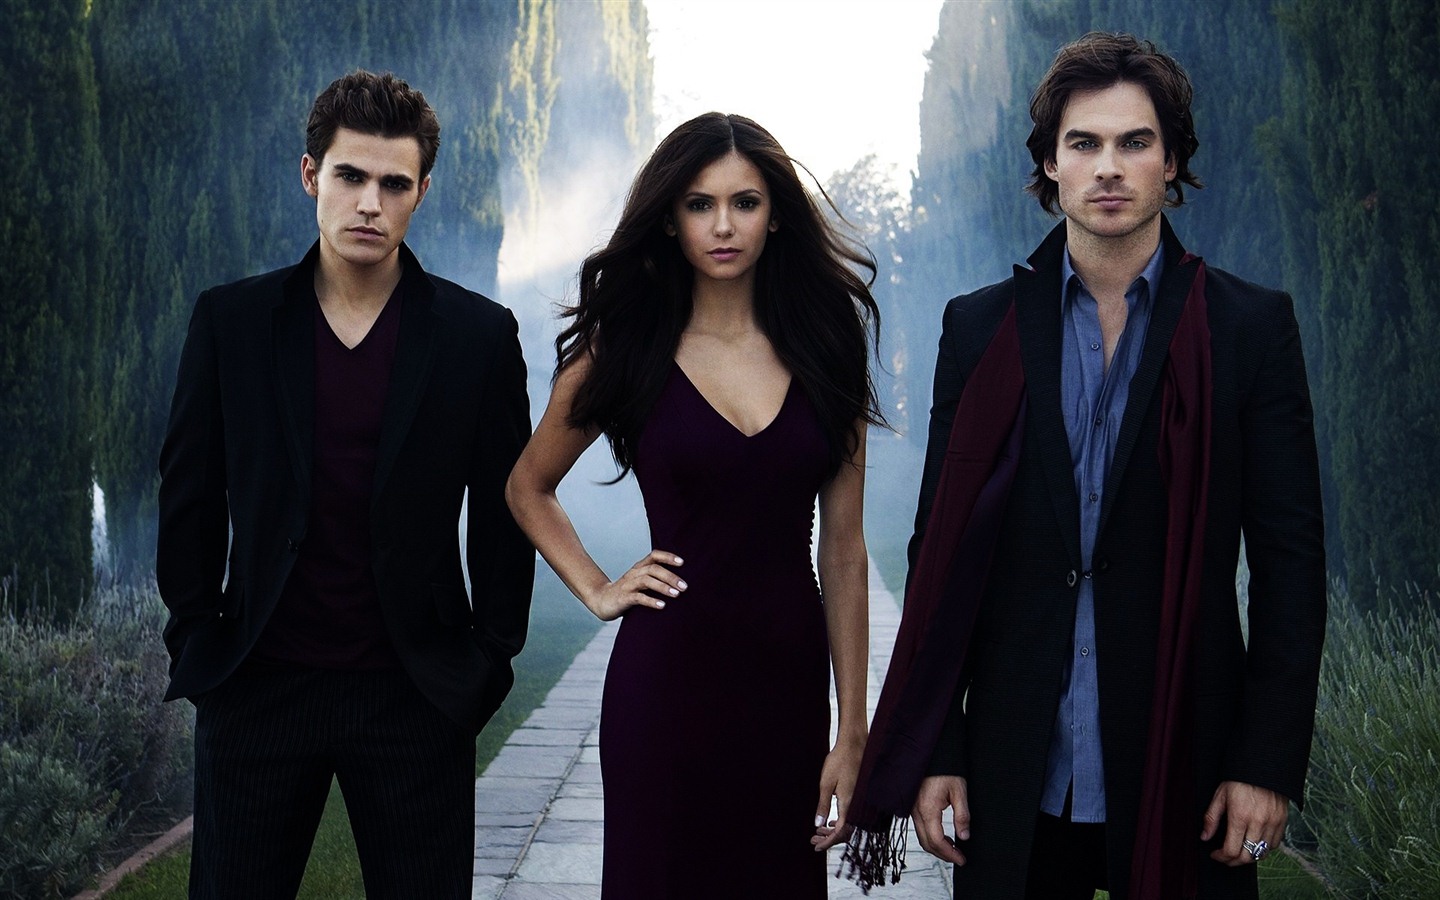 The Vampire Diaries HD Wallpapers #6 - 1440x900